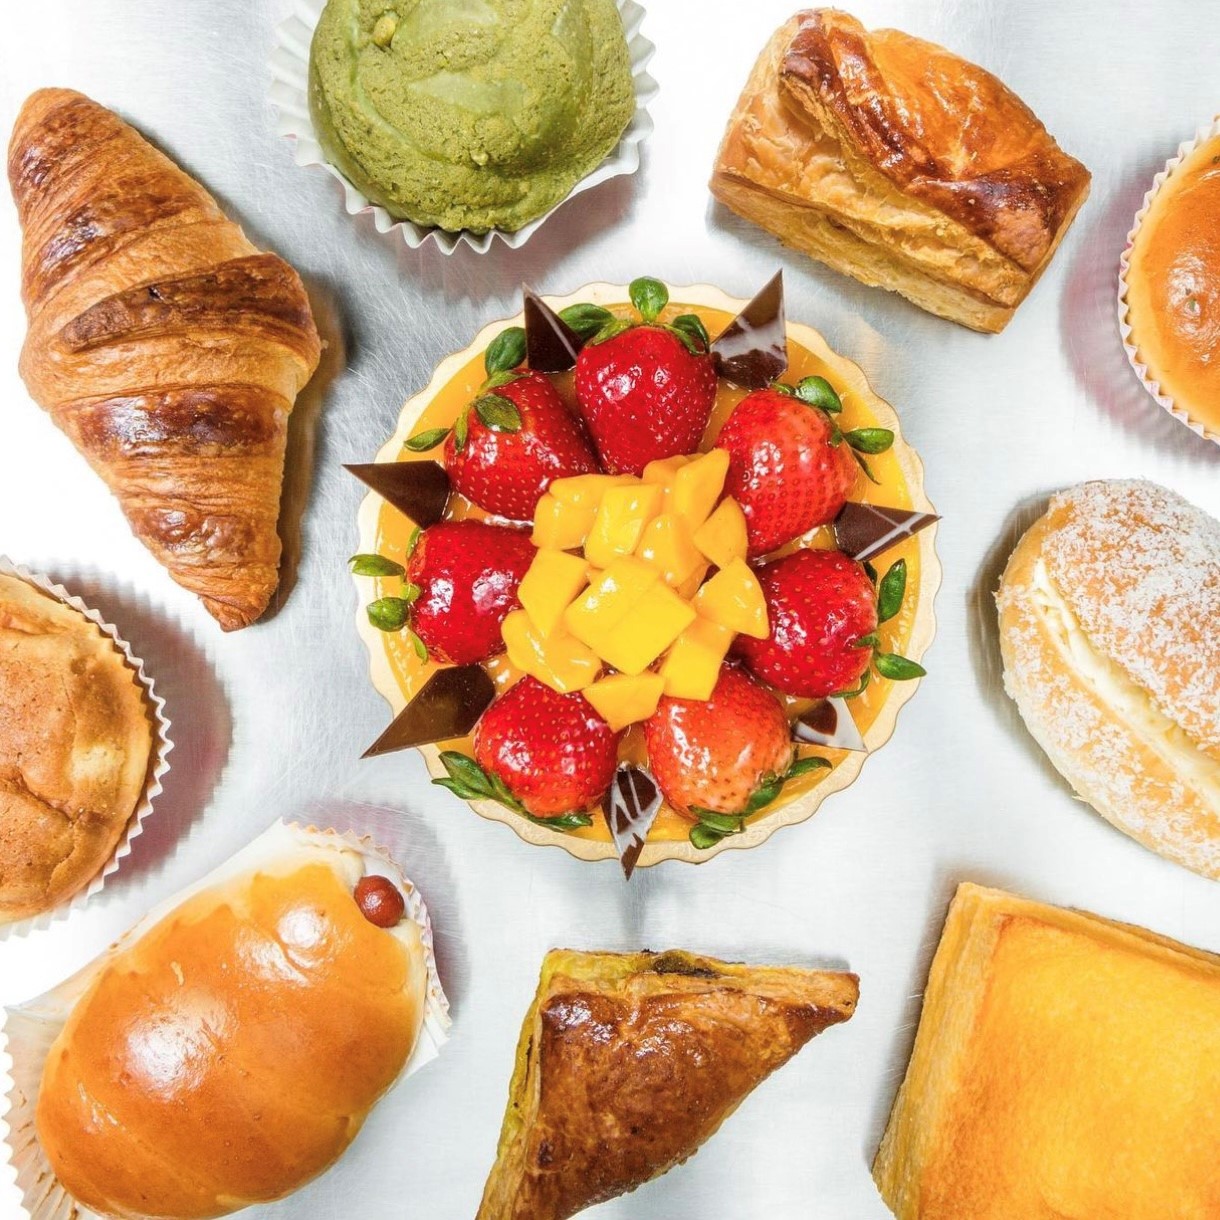 A variety of pastries from Saint Germain Bakery